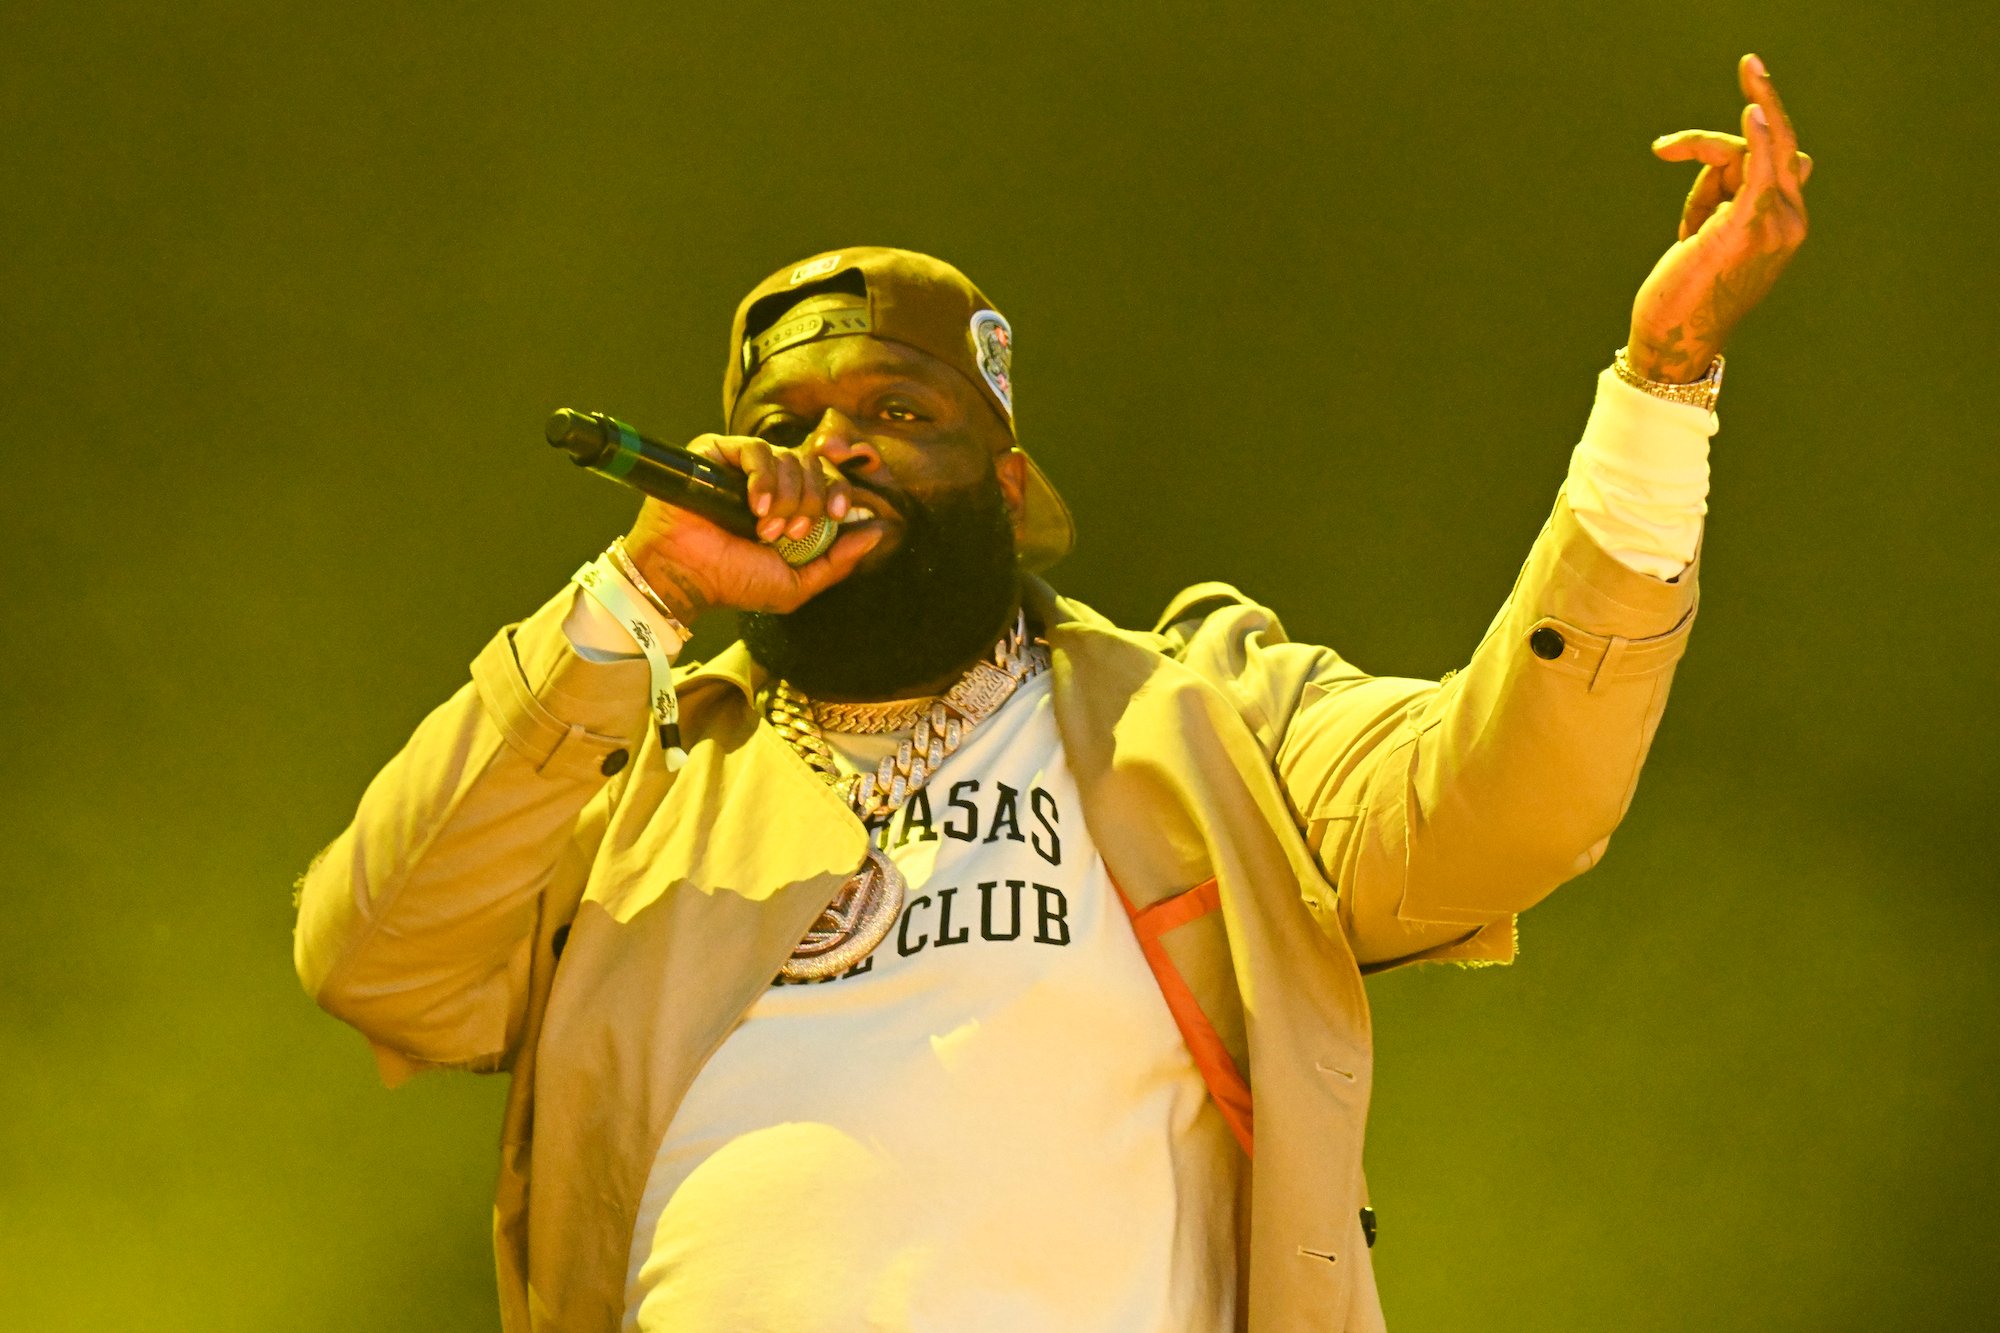 Rick Ross holding a mic and performing